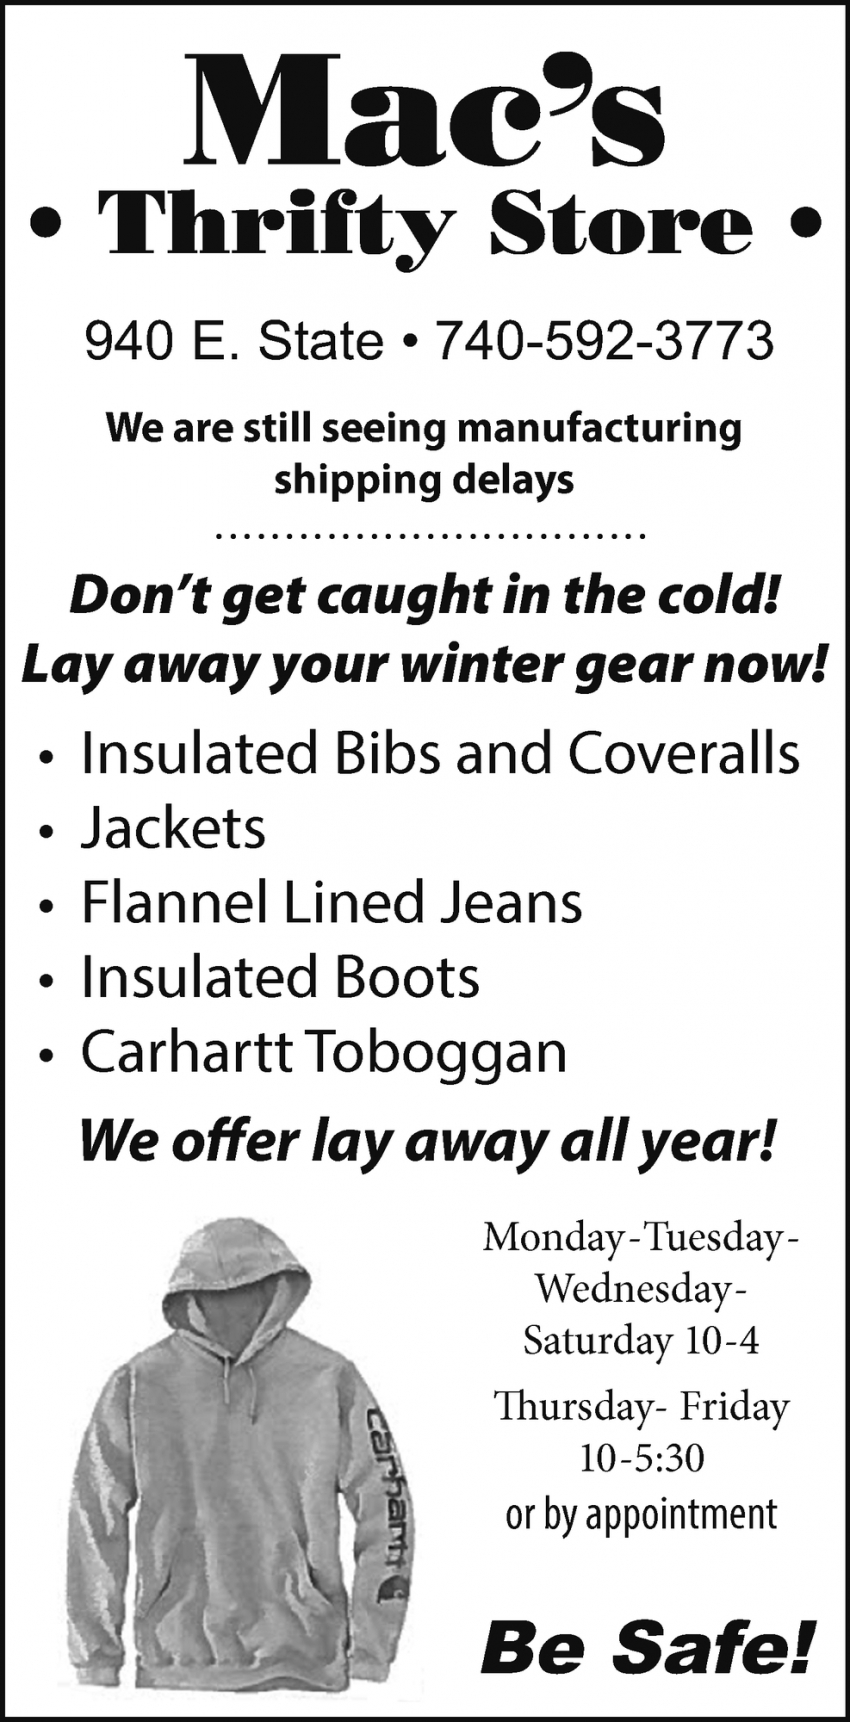 We Offer Lay Away All Year!